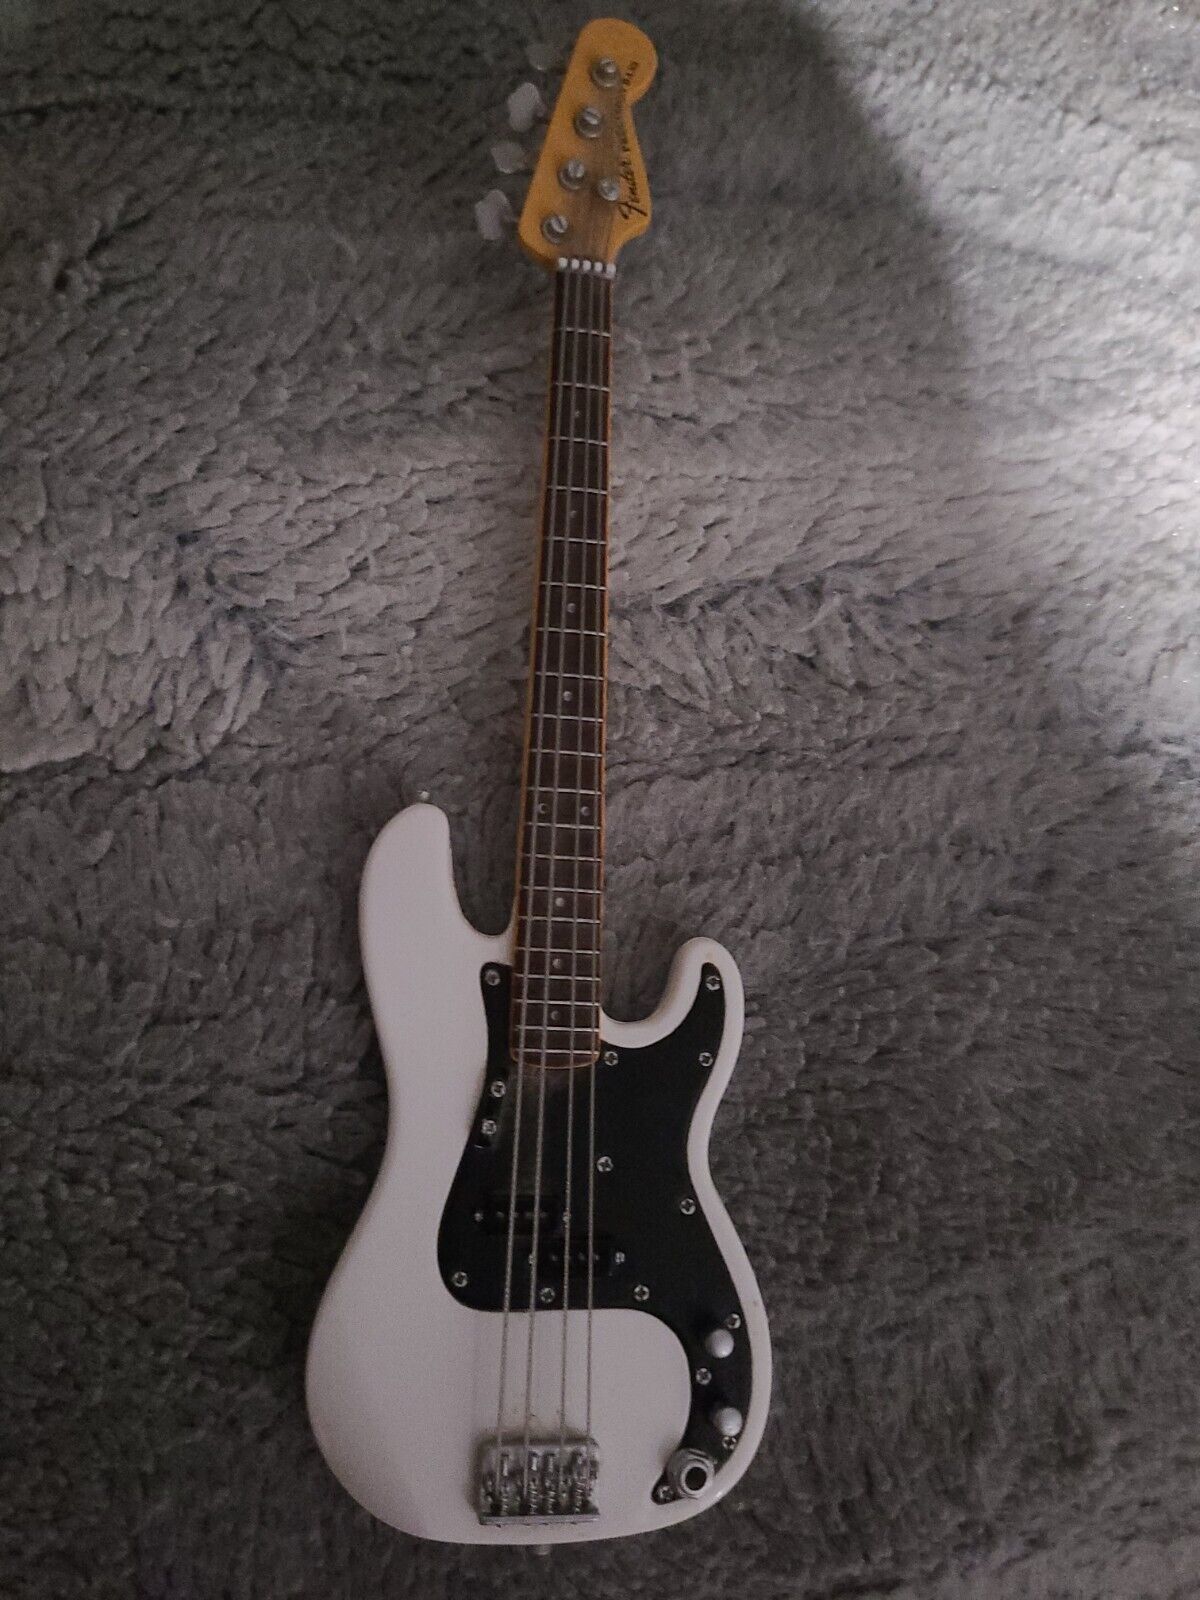 Fender Precision Bass White Mini 7 Inch Model Guitar USED Surface Dirt 